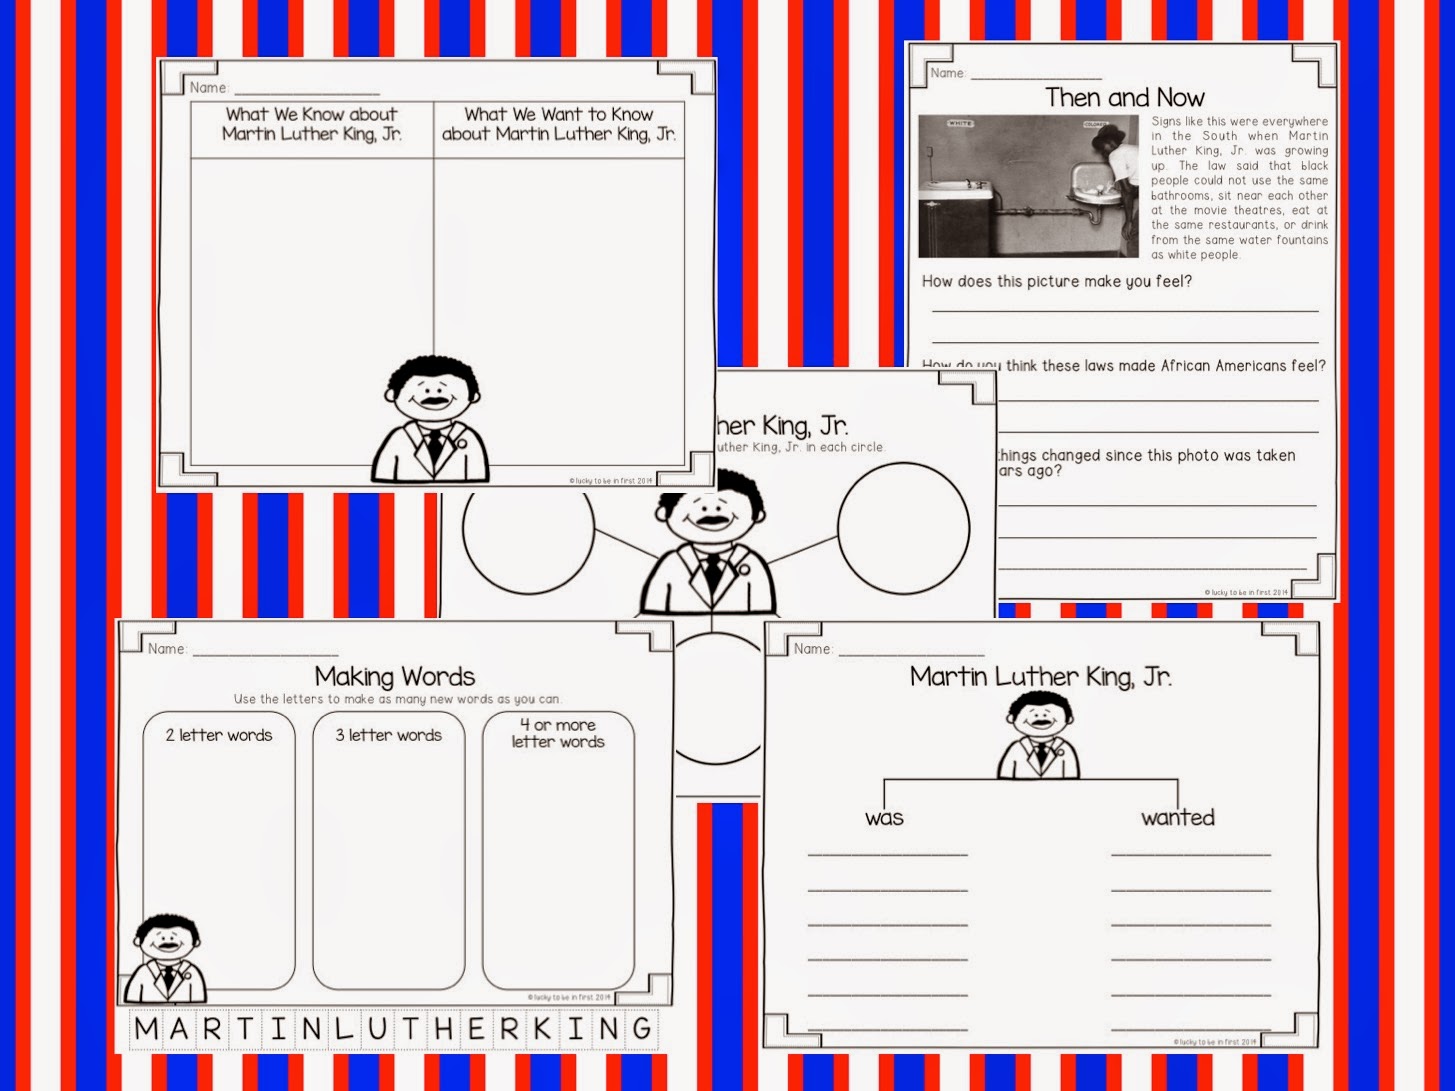 mlk printable activities for classrooms | Lucky Learning with Molly Lynch